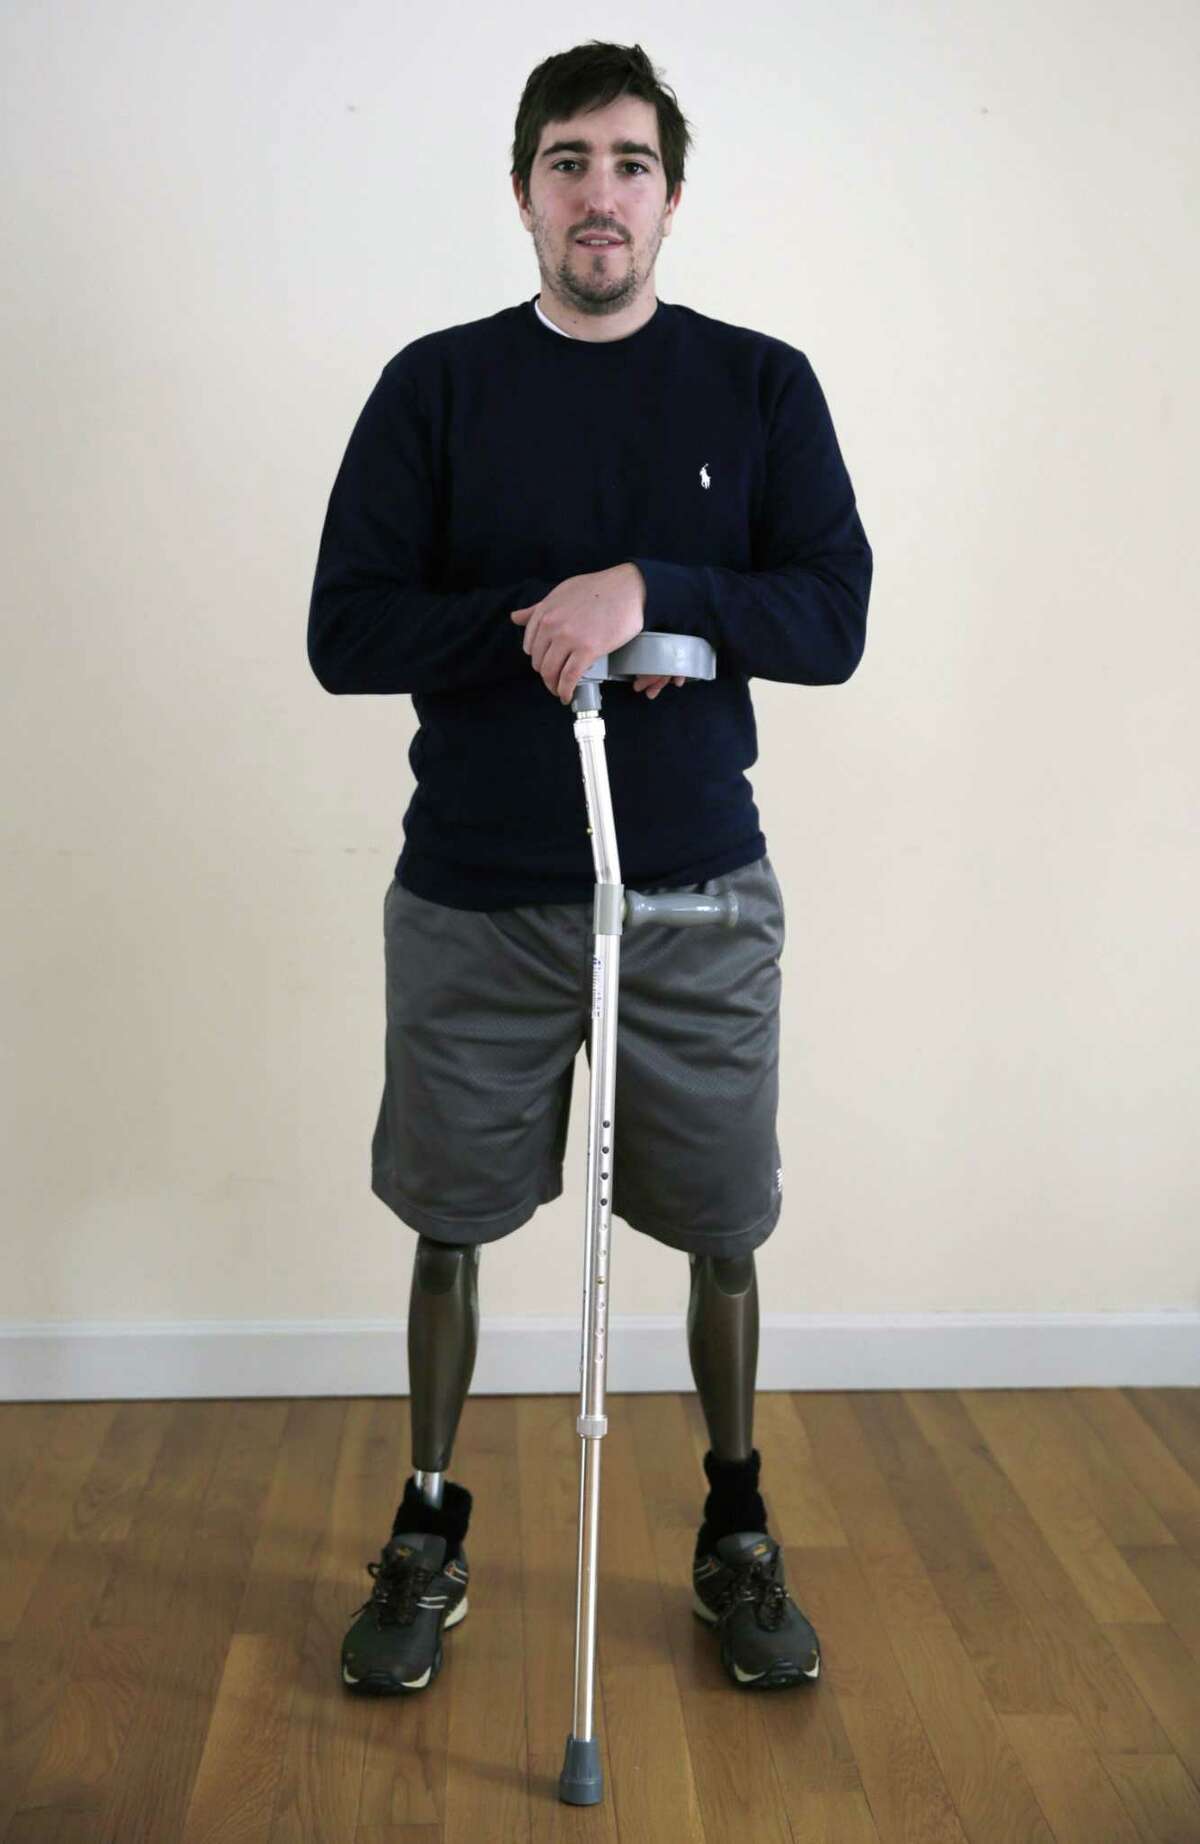 FILE - In this March 14, 2014 file photo, Jeff Bauman stands in his home in Carlisle, Mass. Bauman, who lost both of his legs in the Boston Marathon bombings, testified Thursday, March 5, 2015, in the federal death penalty trial of Dzhokhar Tsarnaev in Boston. Tsarnaev is charged with conspiring with his brother to place twin bombs near the finish line of the race, killing three and injuring 260 people. (AP Photo/Charles Krupa, File)